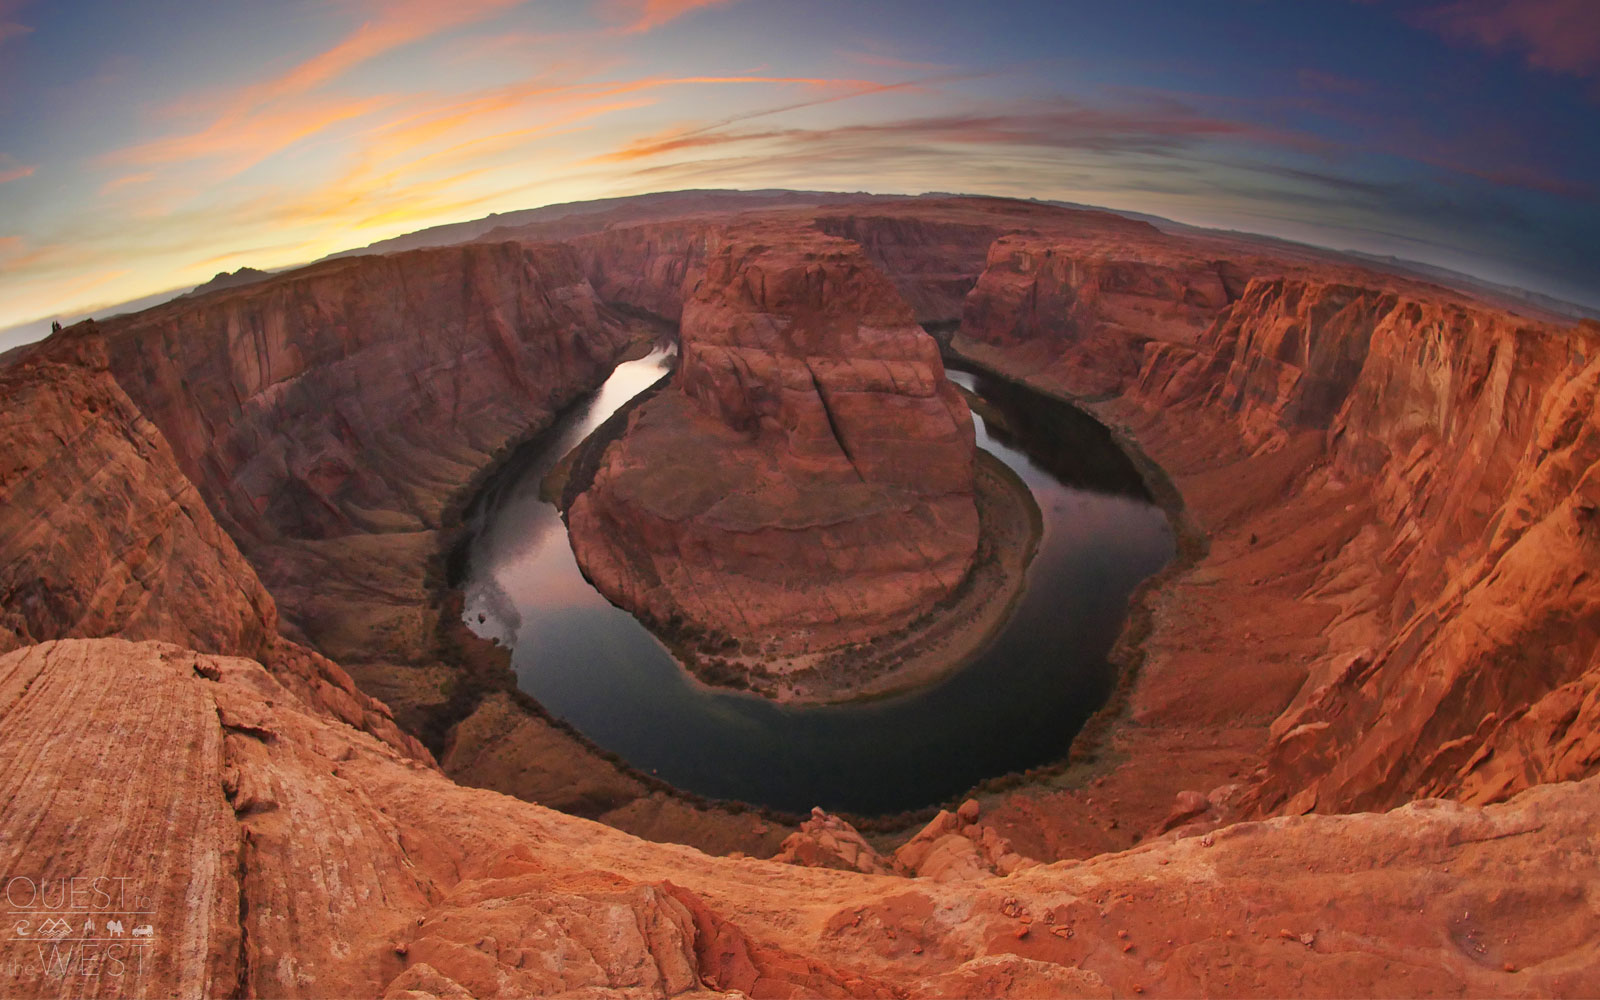 Horseshoe Bend has become a popular attraction for travelers, and it’s one that Paquette says lives up to the hype.
                              “This place is one of the world’s most photographed locations, so it’s cool to get to check it off of the bucket list, but you only get a real sense of the scale when you see it in person,  Paquette noted.  It looks huge in the photo but you don’t really get a sense of how deep it is until you’re right there in front of it,” he added.
                              The bend in the Colorado River is located about 140 miles from Grand Canyon’s North and South Rims and is visible from a steep cliff that's accessed through a short hike off U.S. Route 89.